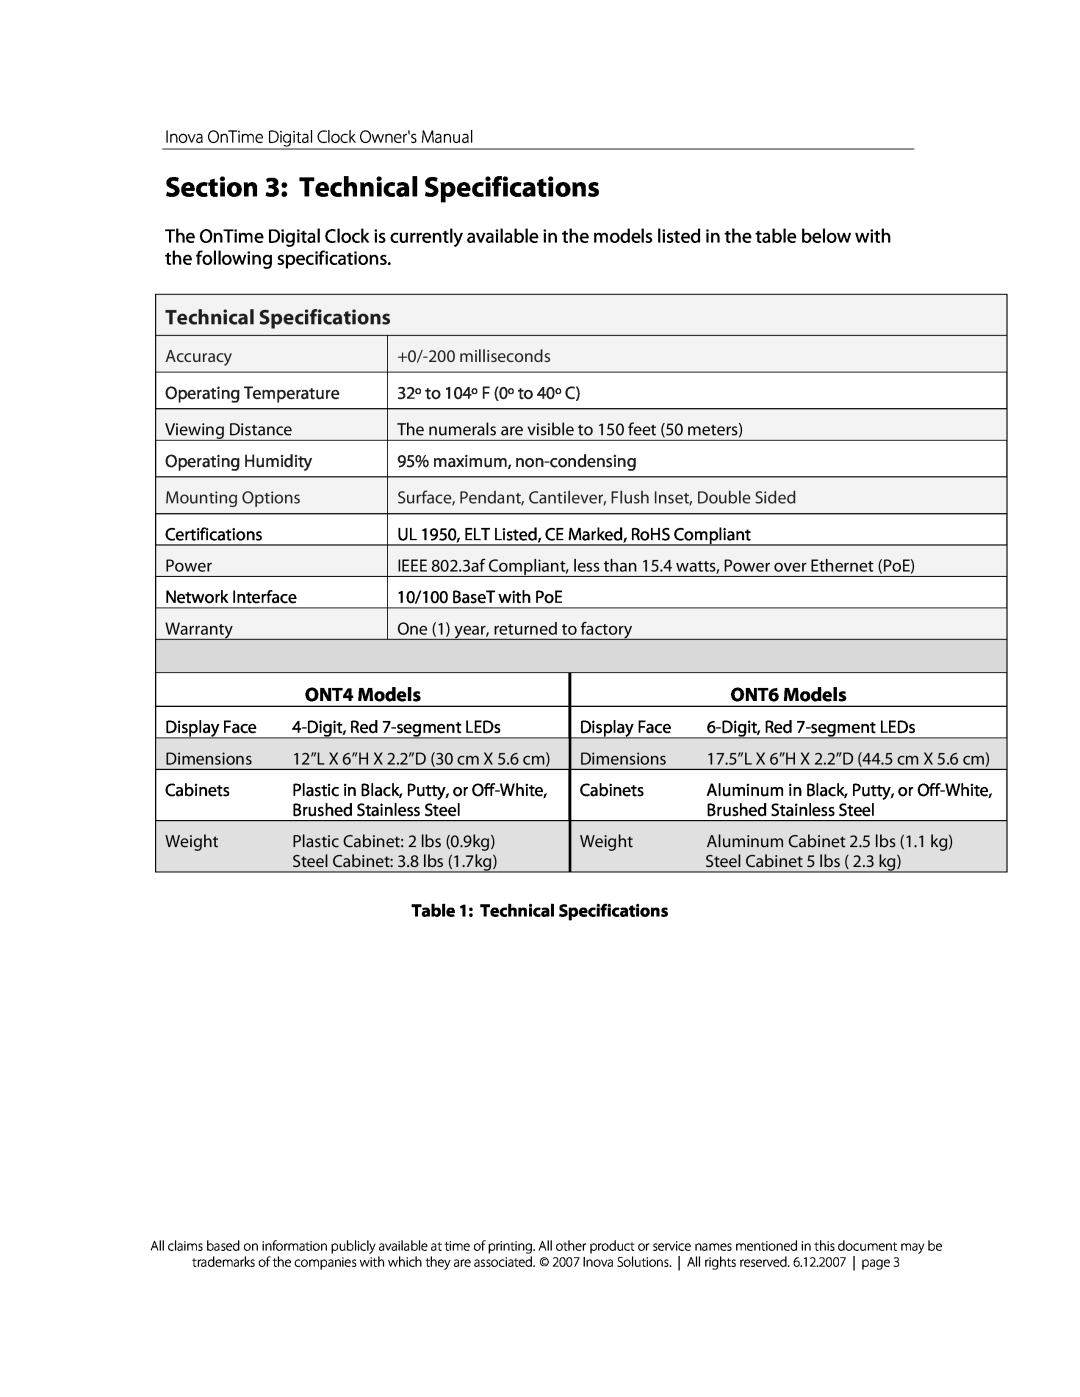 Inova OnTimeTM owner manual Technical Specifications, ONT4 Models, ONT6 Models, Accuracy Operating Temperature 